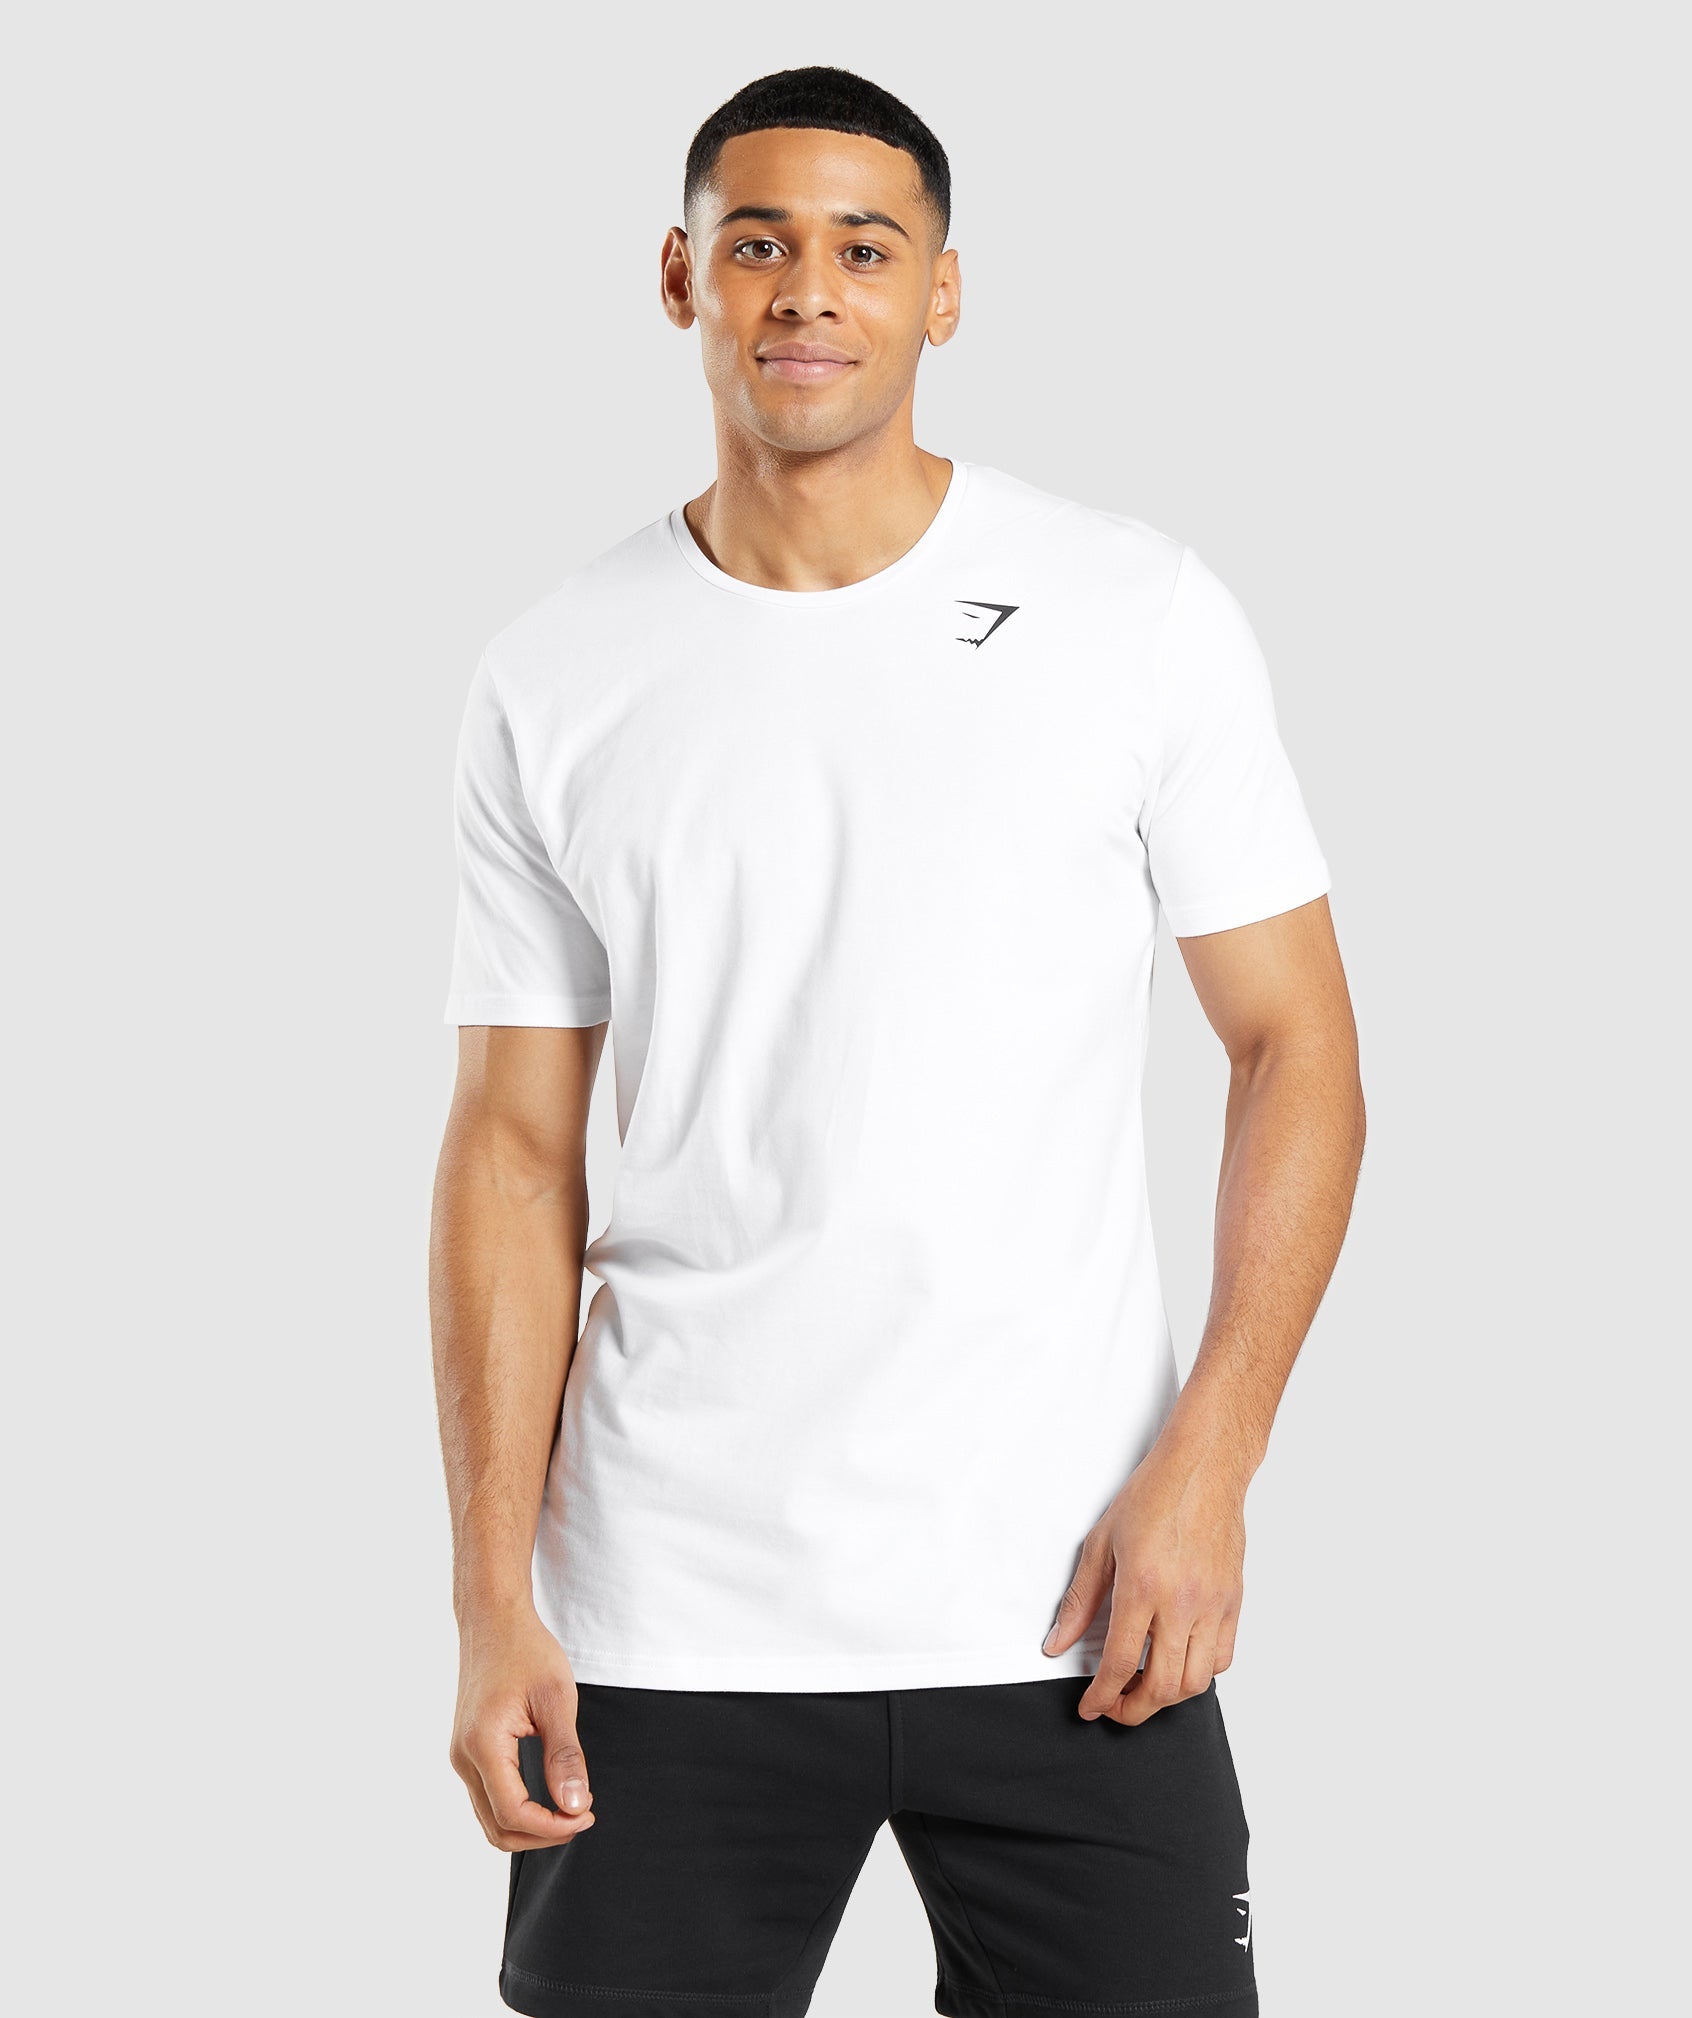 Essential T-Shirt in White - view 1